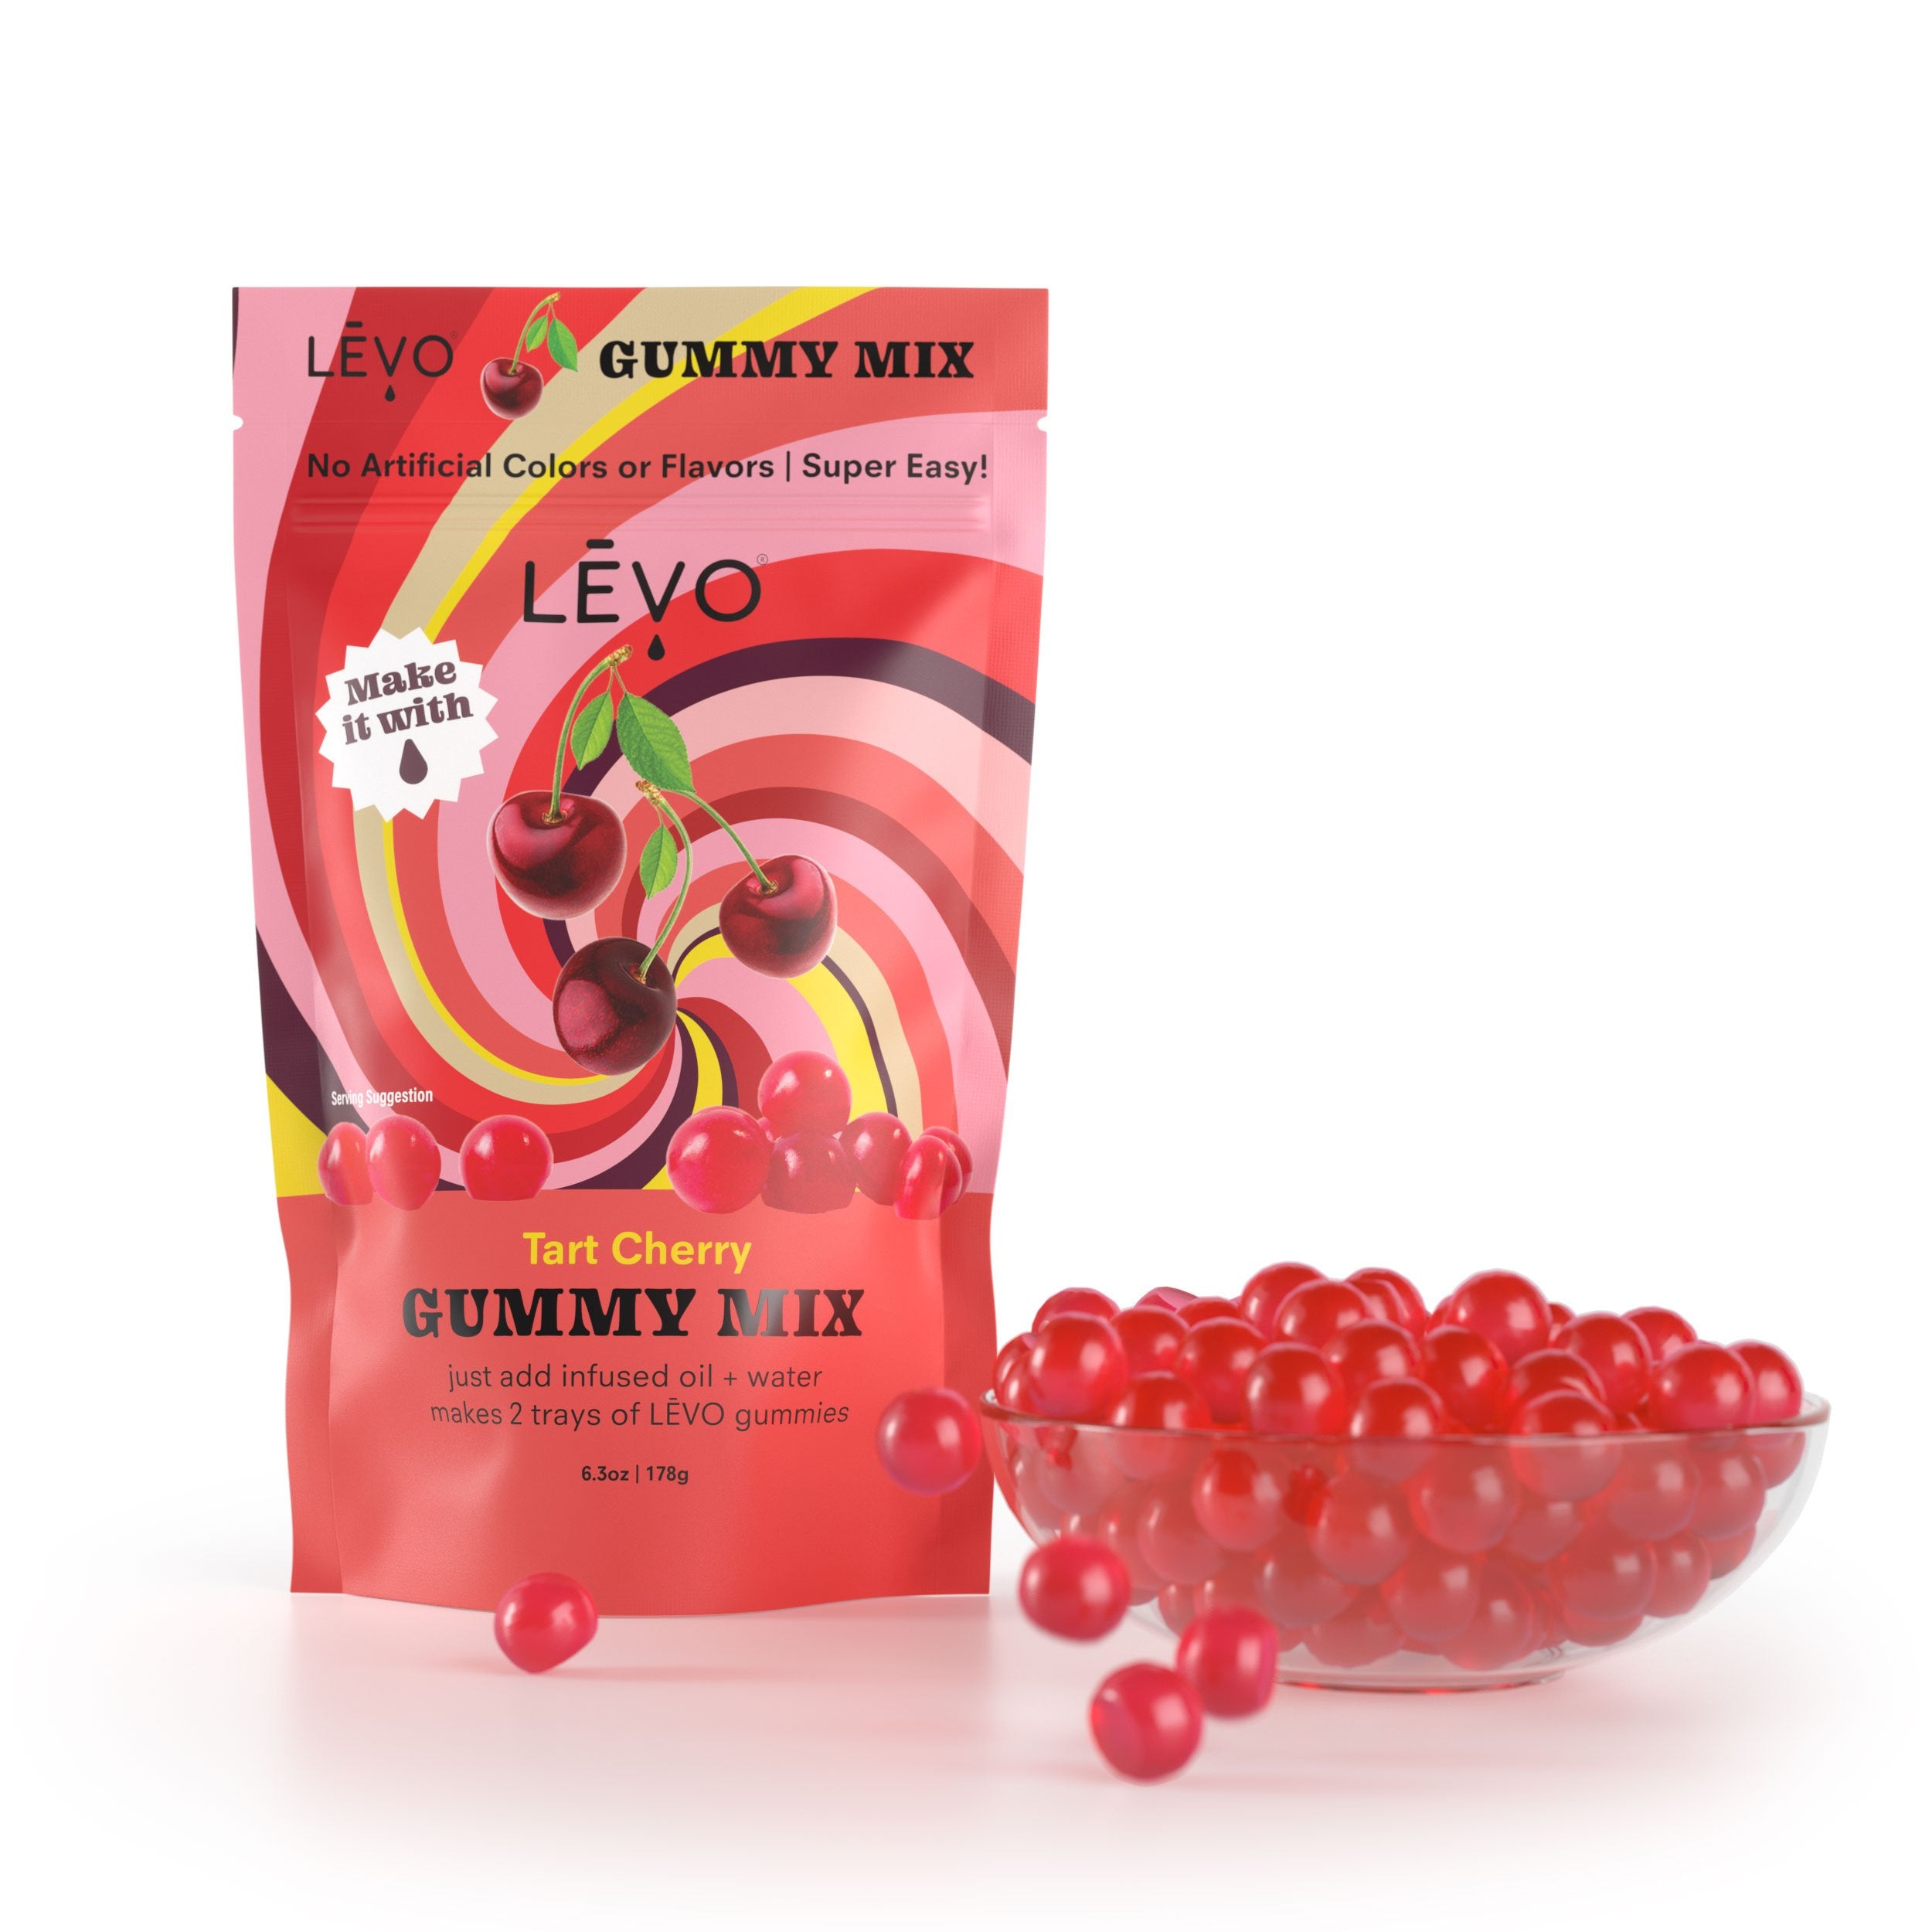 Looking to make edible and shareable snacks at home? Want to make gummies that will help you relax? Try LEVO Tart Cherry Gummy Mix and follow the directions printed on the bag.